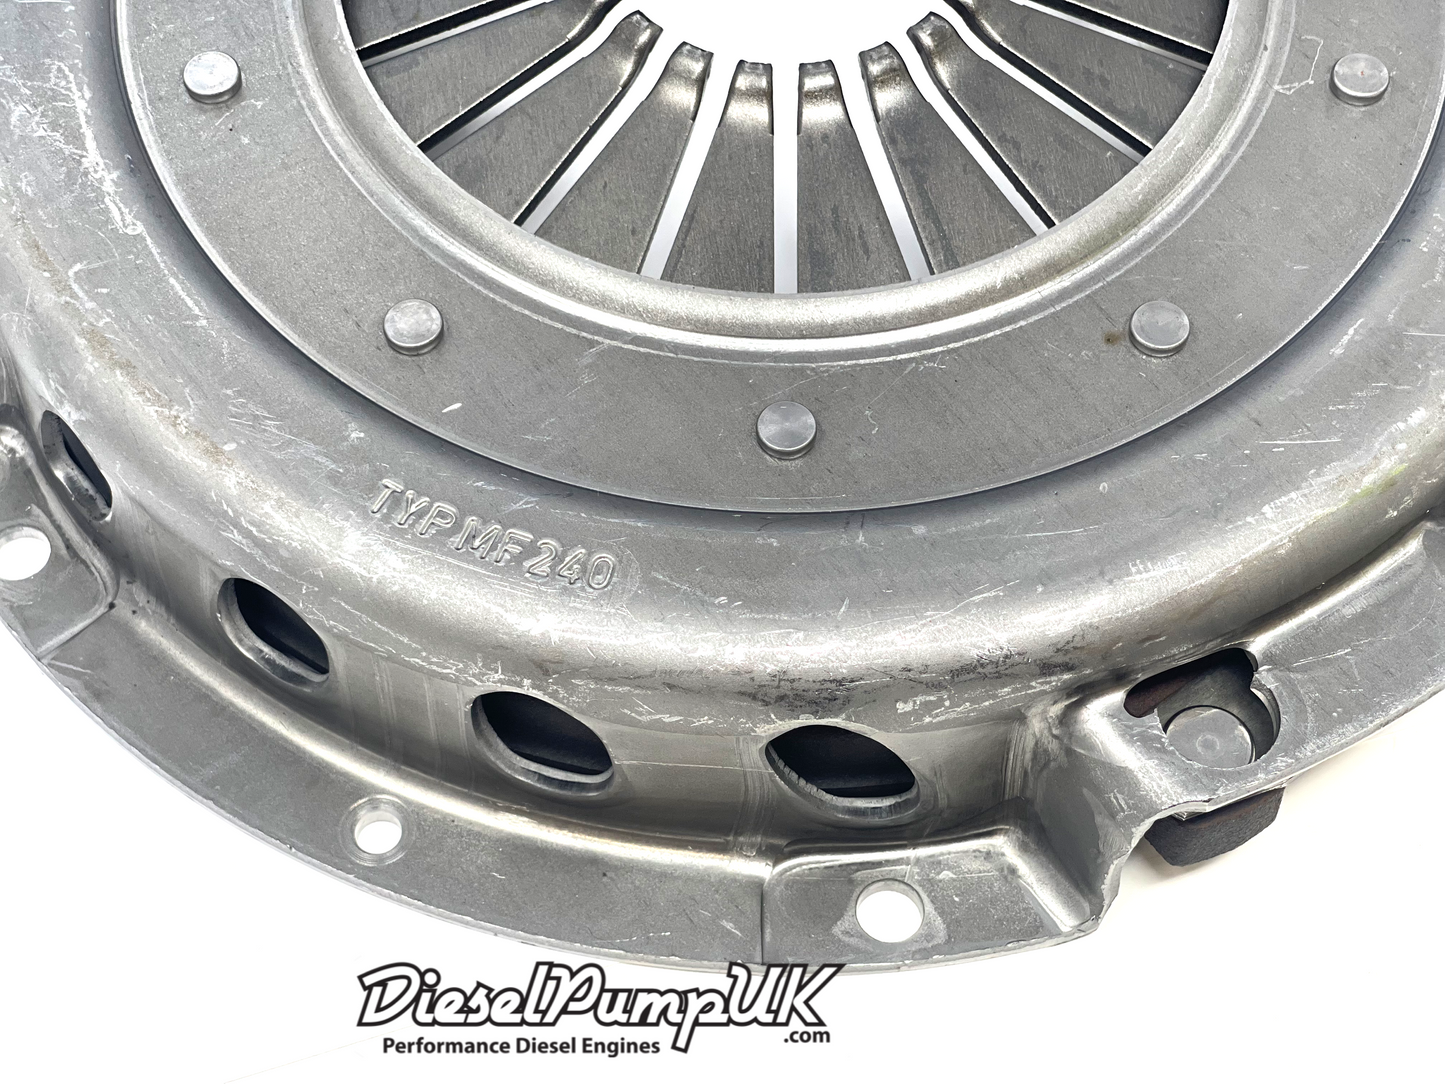 Sachs Performance Clutch Cover - Reinforced